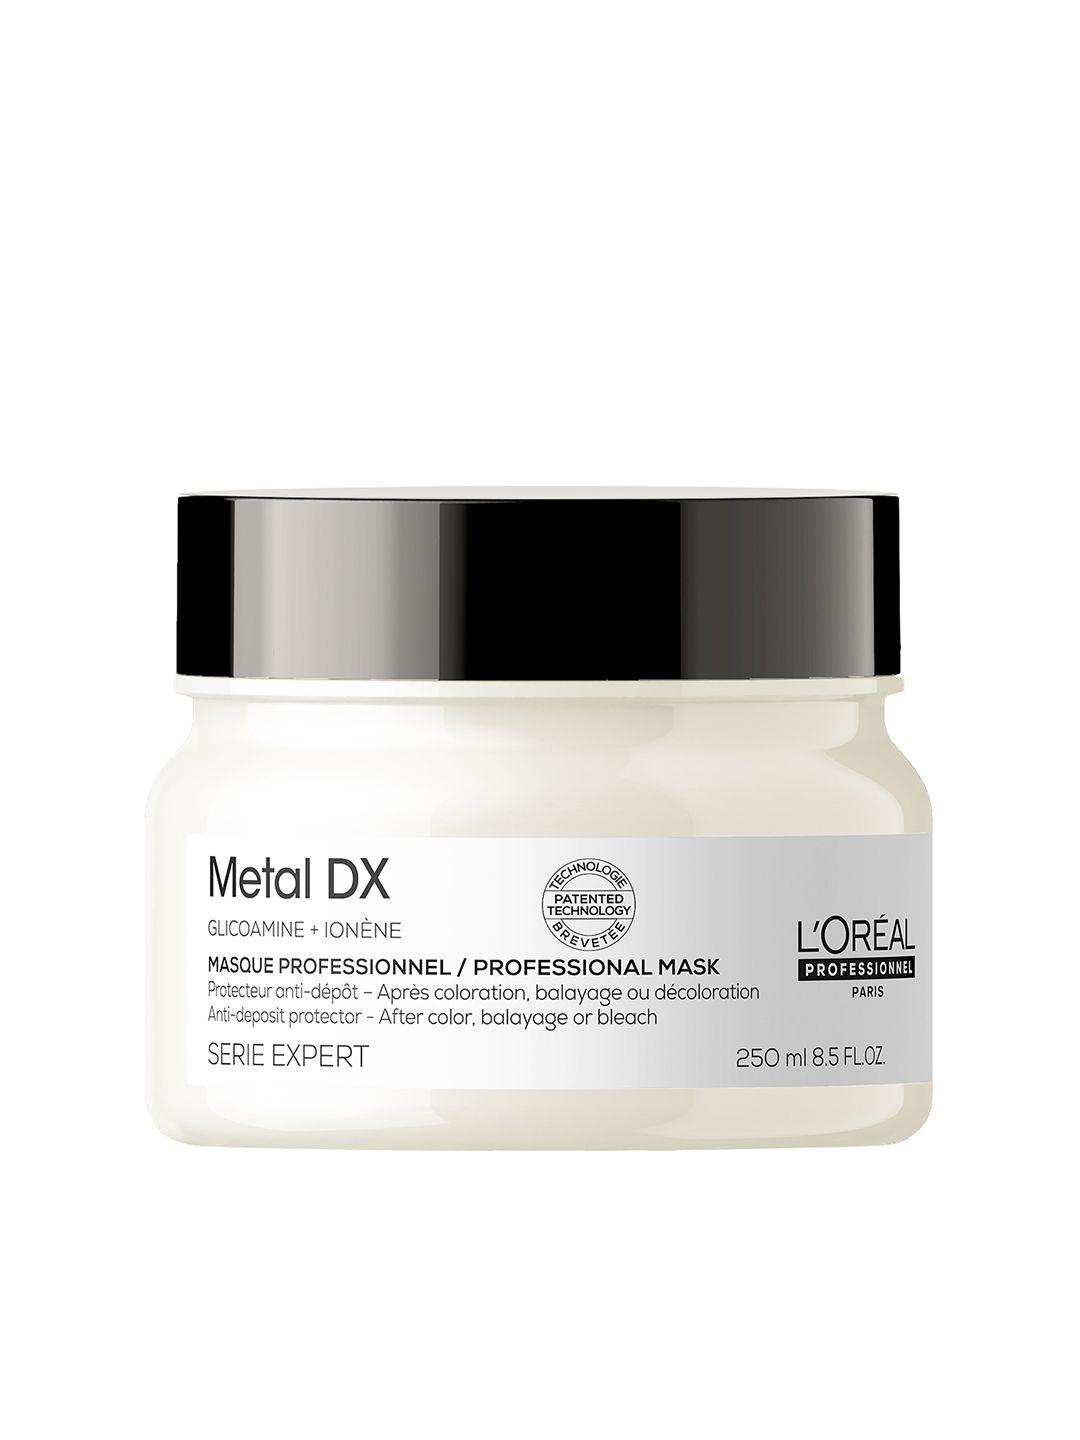 loreal professionnel metal dx anti-deposit protector mask with glicoamine - 250 ml